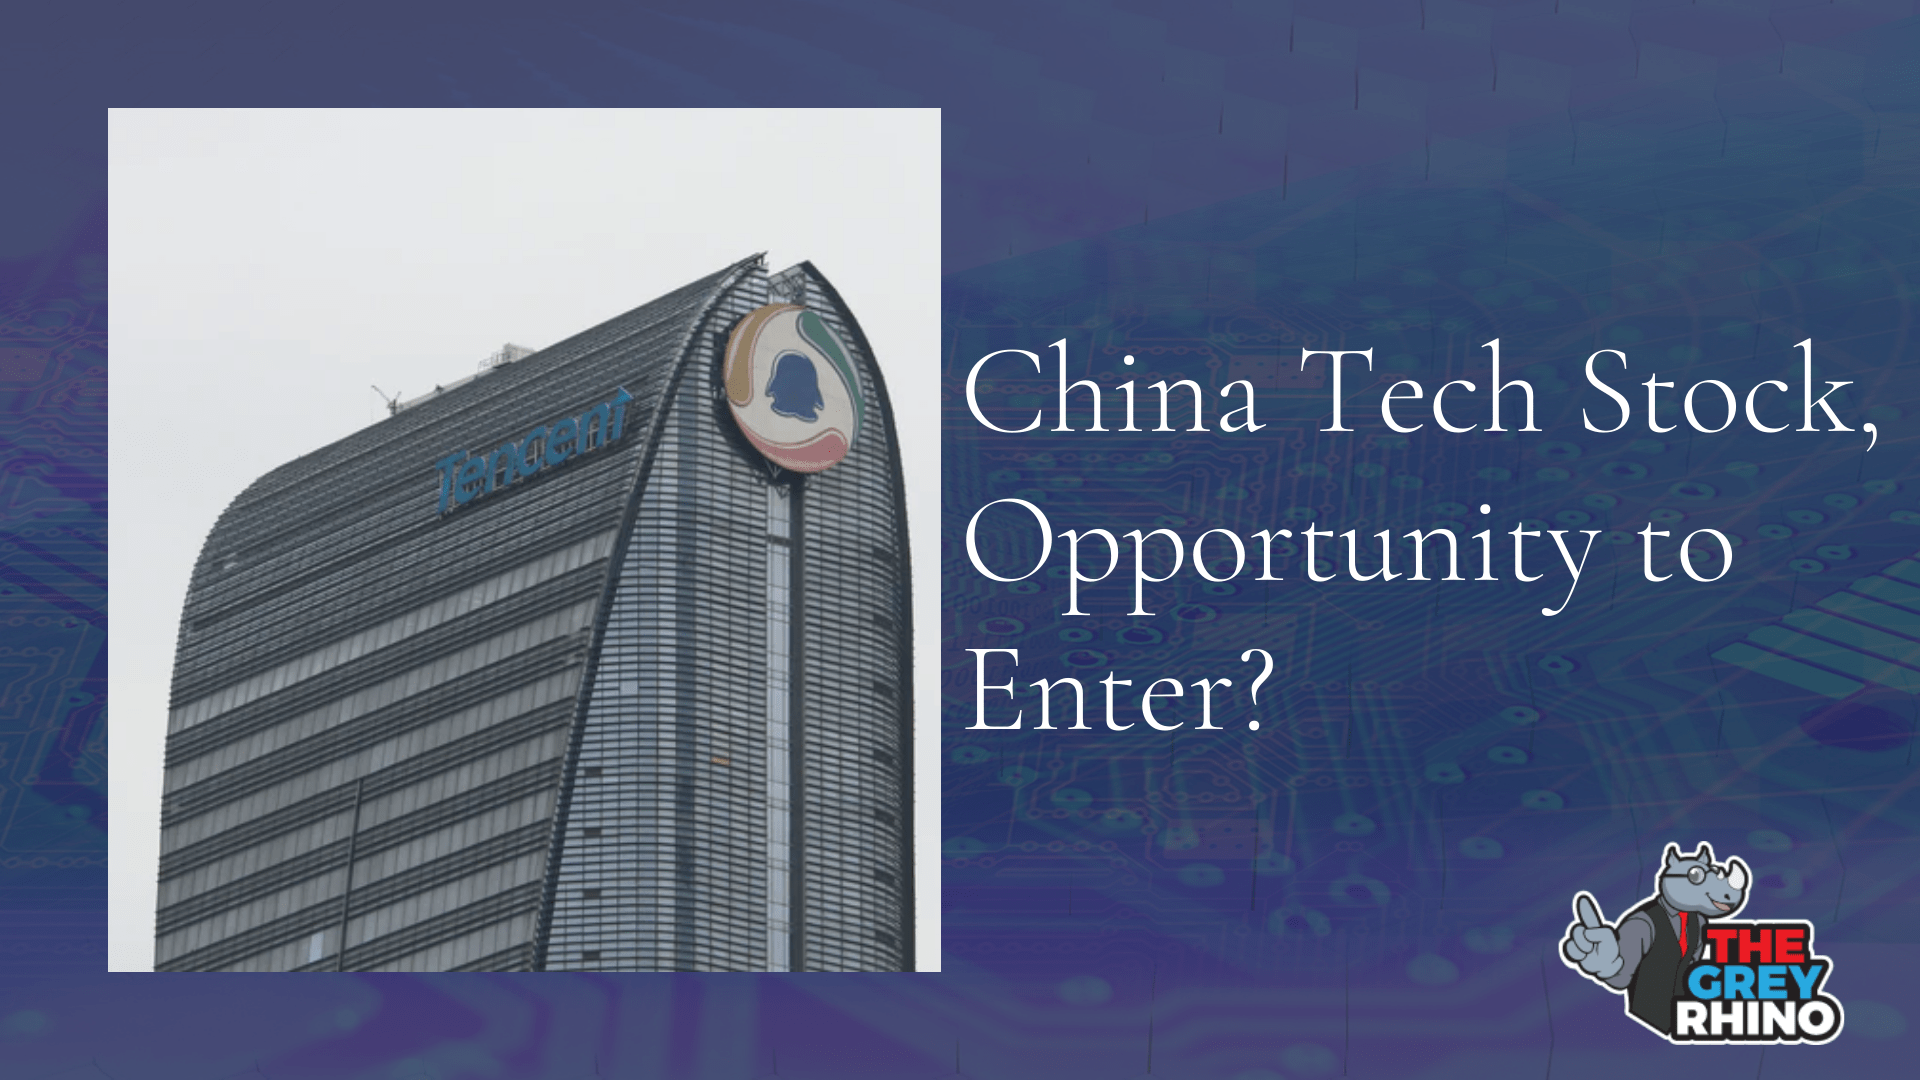 Is it an Opportunity to buy into China Tech Stocks now?